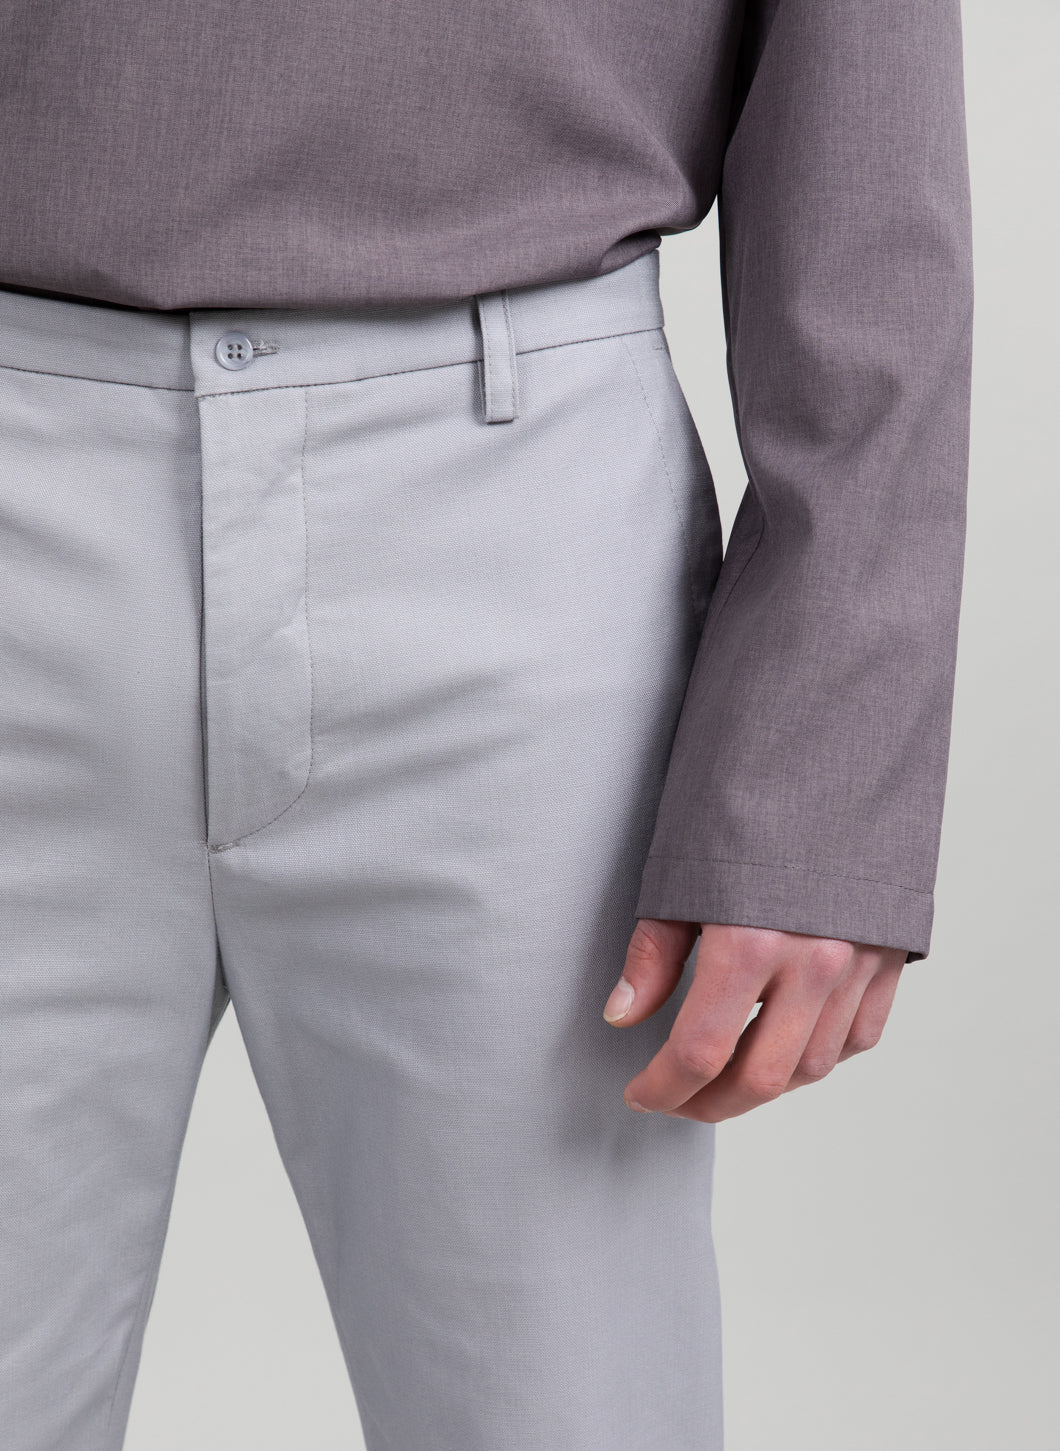 Fitted Pants in Pearl Grey Cotton Twill